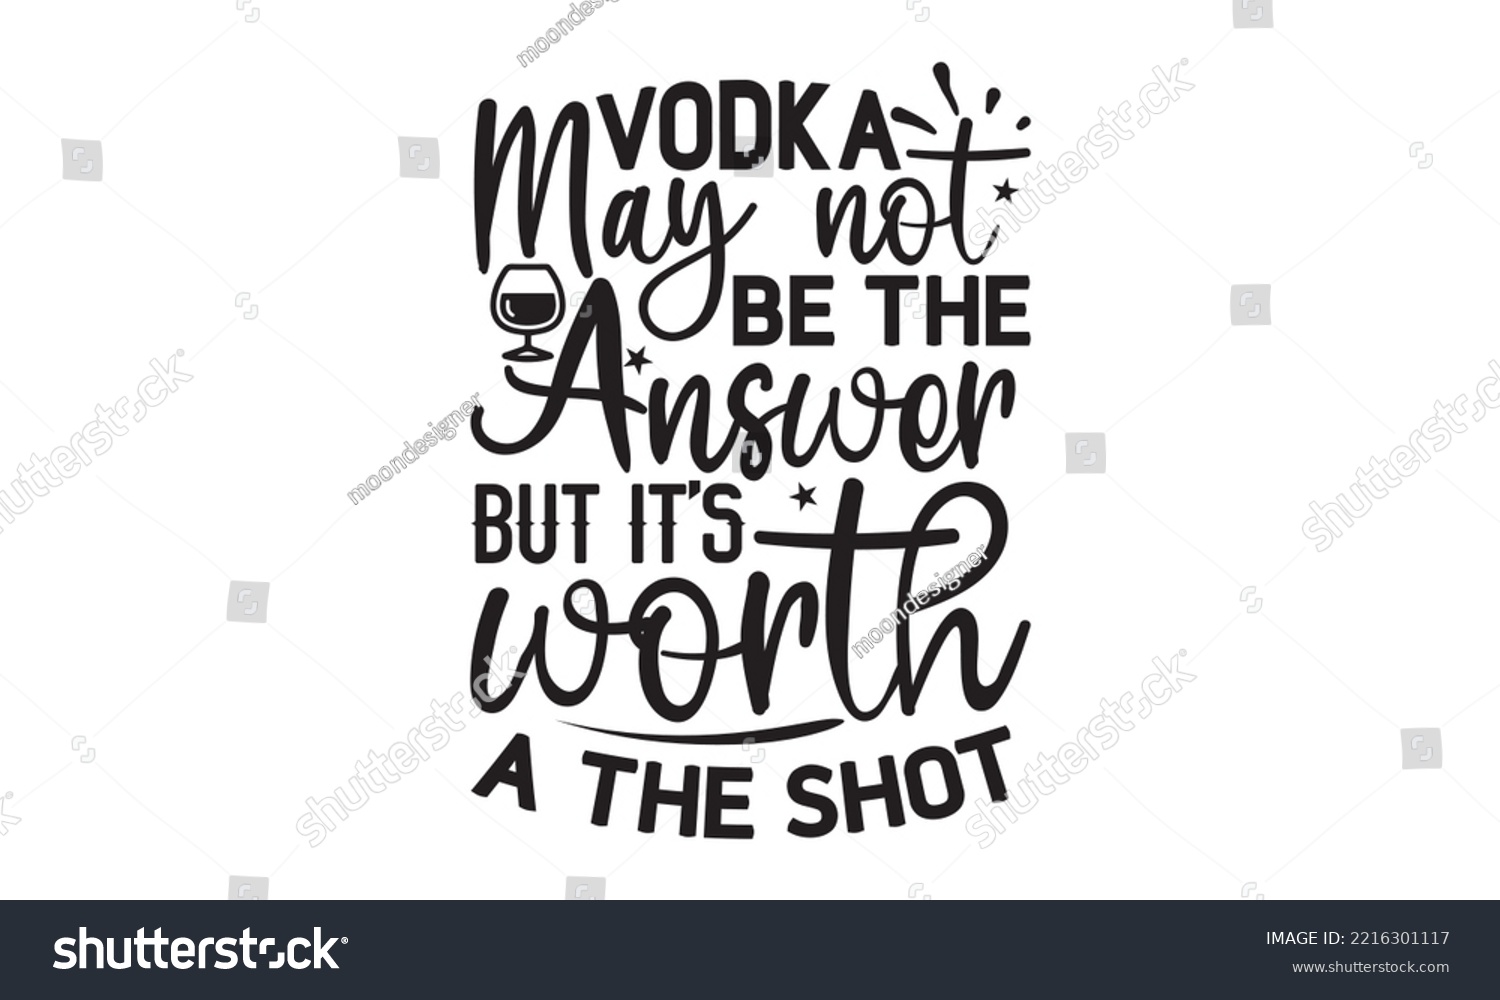 SVG of Vodka may not be the answer but it’s worth a the shot - Alcohol SVG T Shirt design, Girl Beer Design, Prost, Pretzels and Beer, Vector EPS Editable Files, Alcohol funny quotes, Oktoberfest Alcohol SVG svg